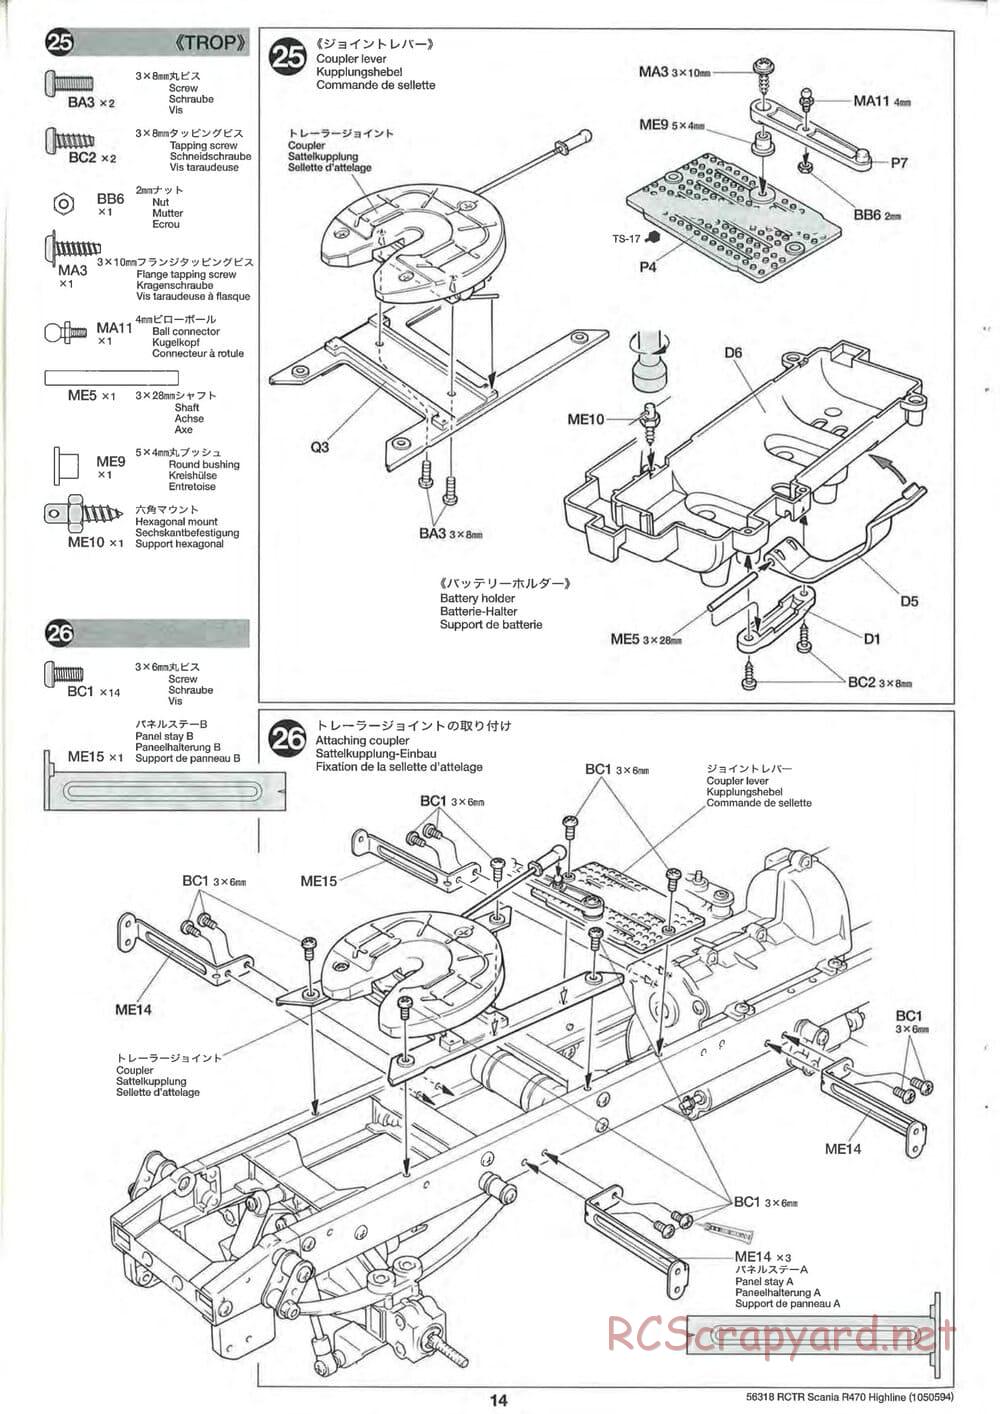 Tamiya - Scania R470 Highline Tractor Truck Chassis - Manual - Page 14